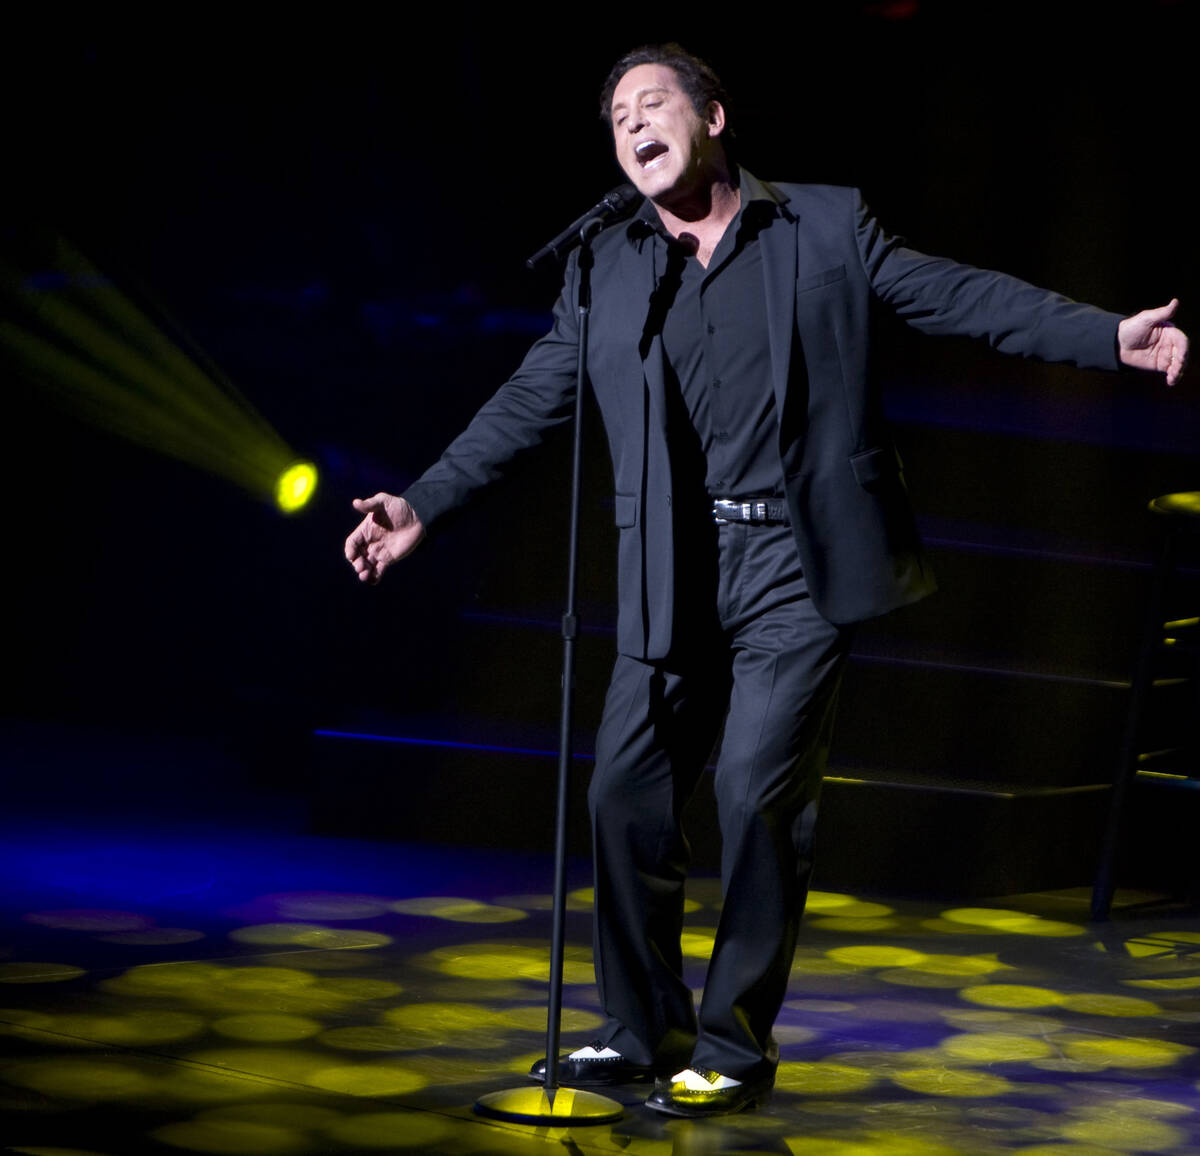 Danny Gans performs at the Encore Theater on Feb. 6, 2009. (Las Vegas Review-Journal)